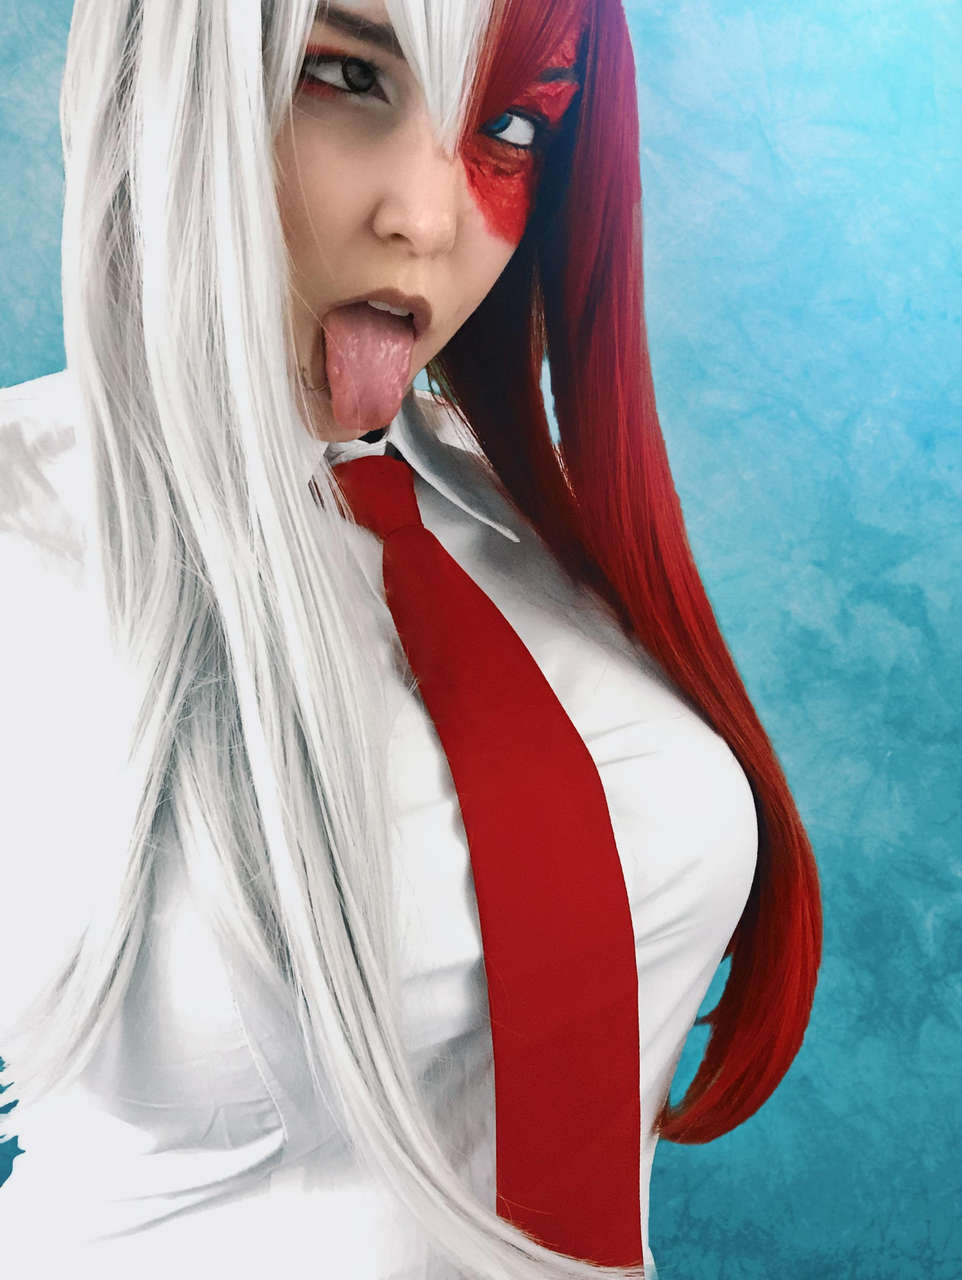 Gender Bend Todoroki Ahegao Andlt 3 Preview From This NSFW Set This Pic Is Sf